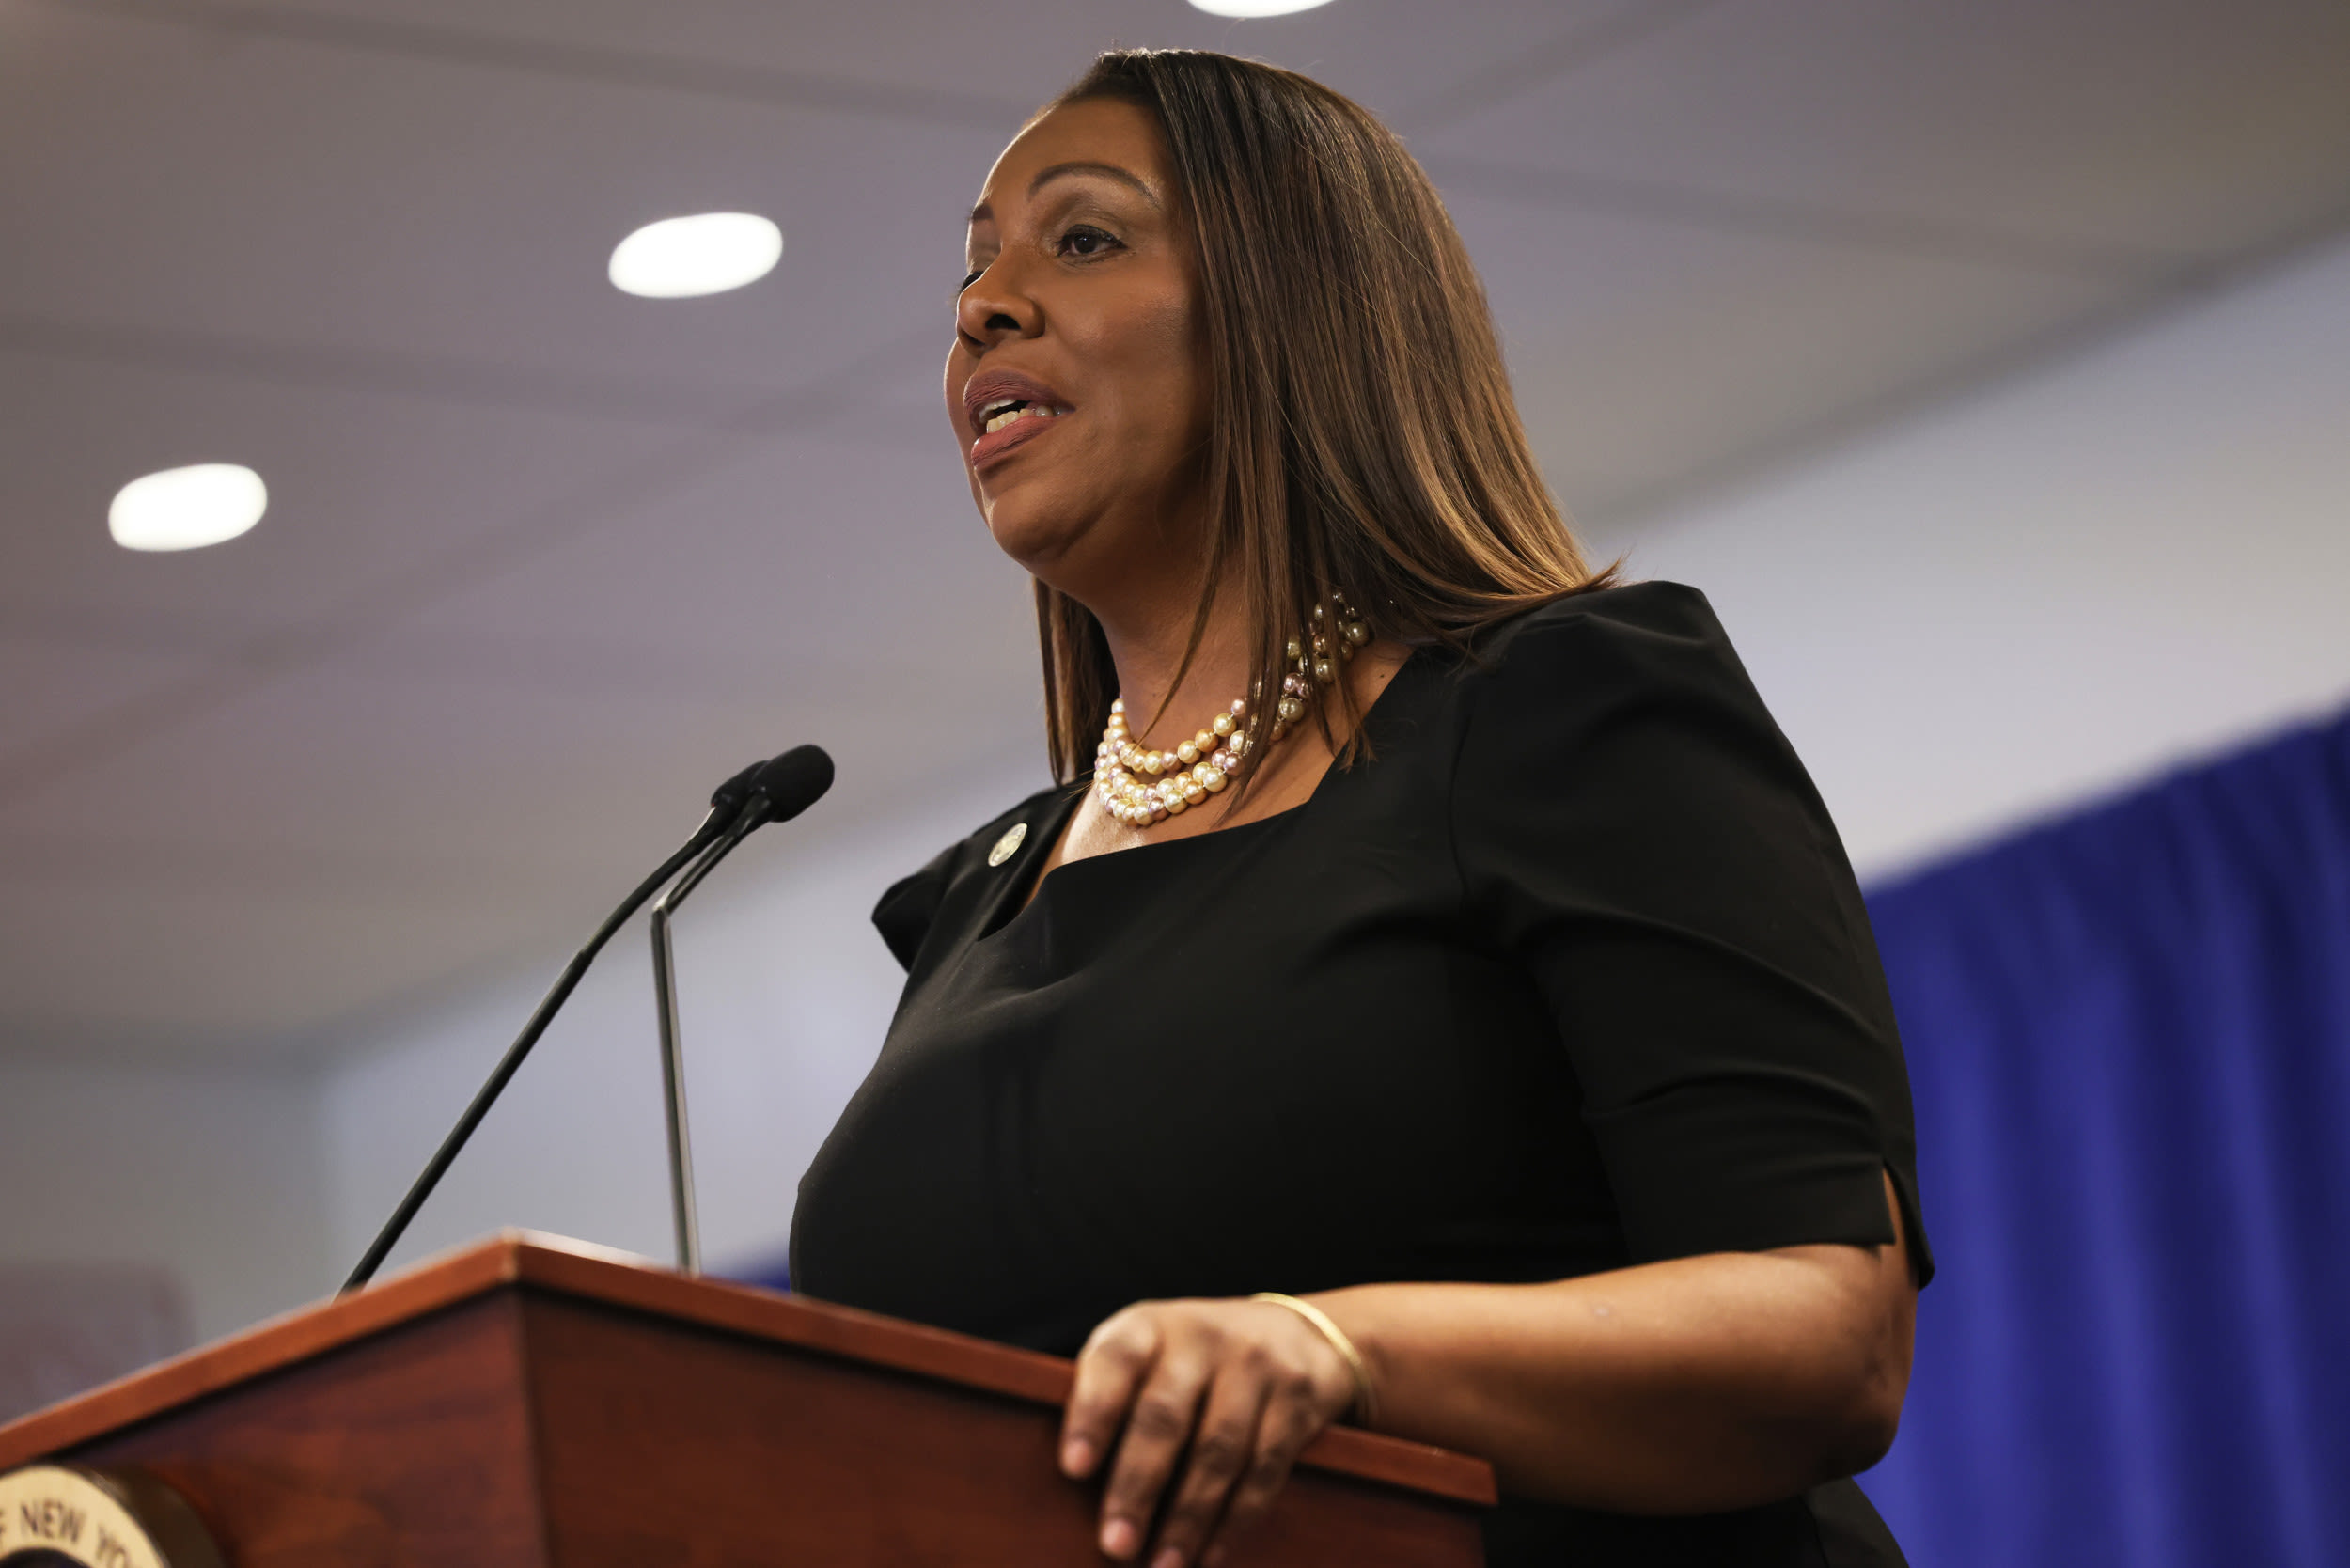 Letitia James says "fight is not over" after Supreme Court ruling